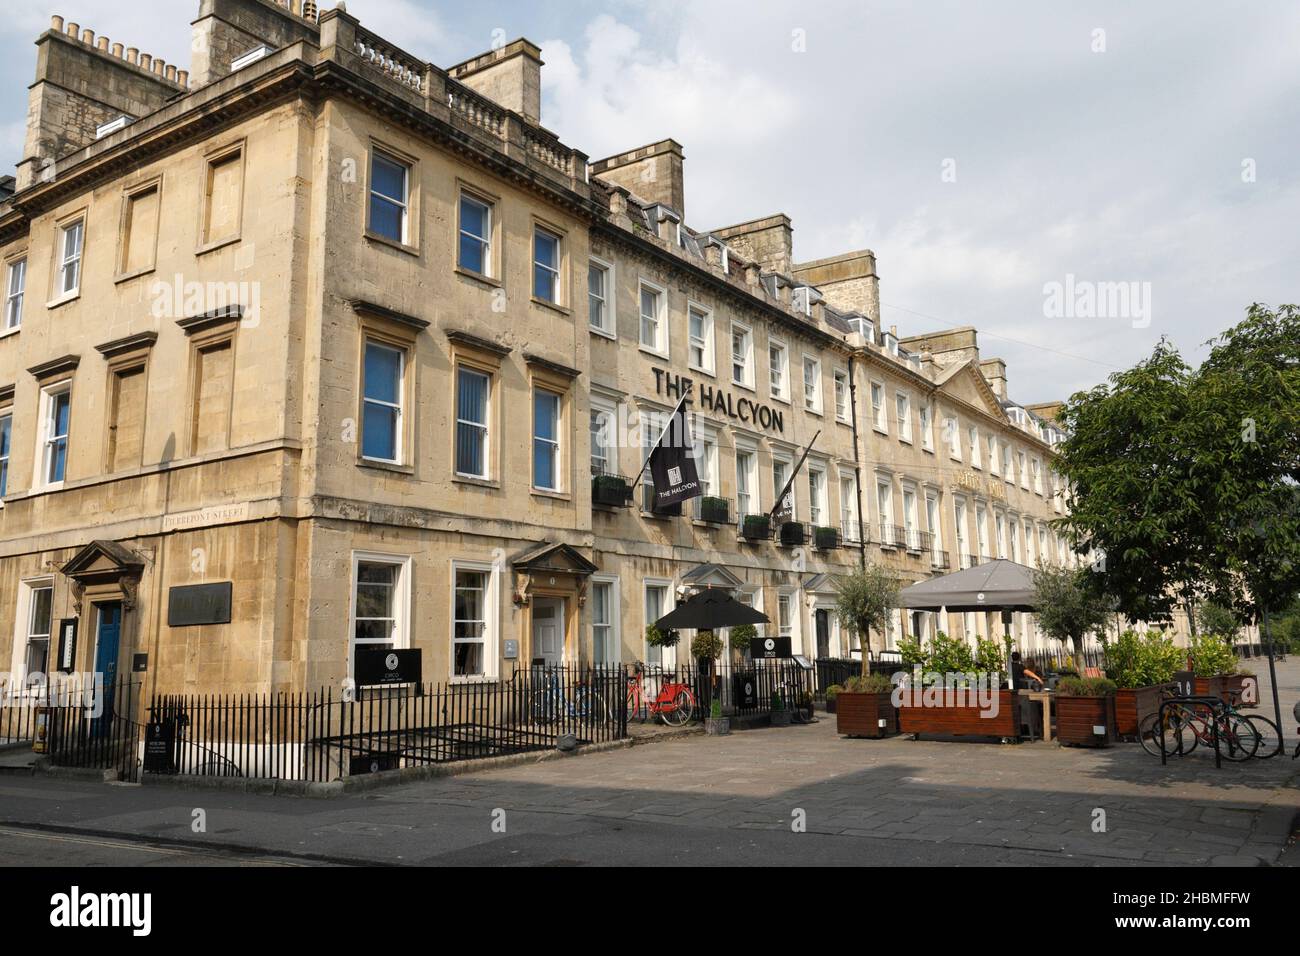 South Parade Bath England, The Halcyon hotel Georgian terrace building. grade I listed. English world heritage city architecture Stock Photo